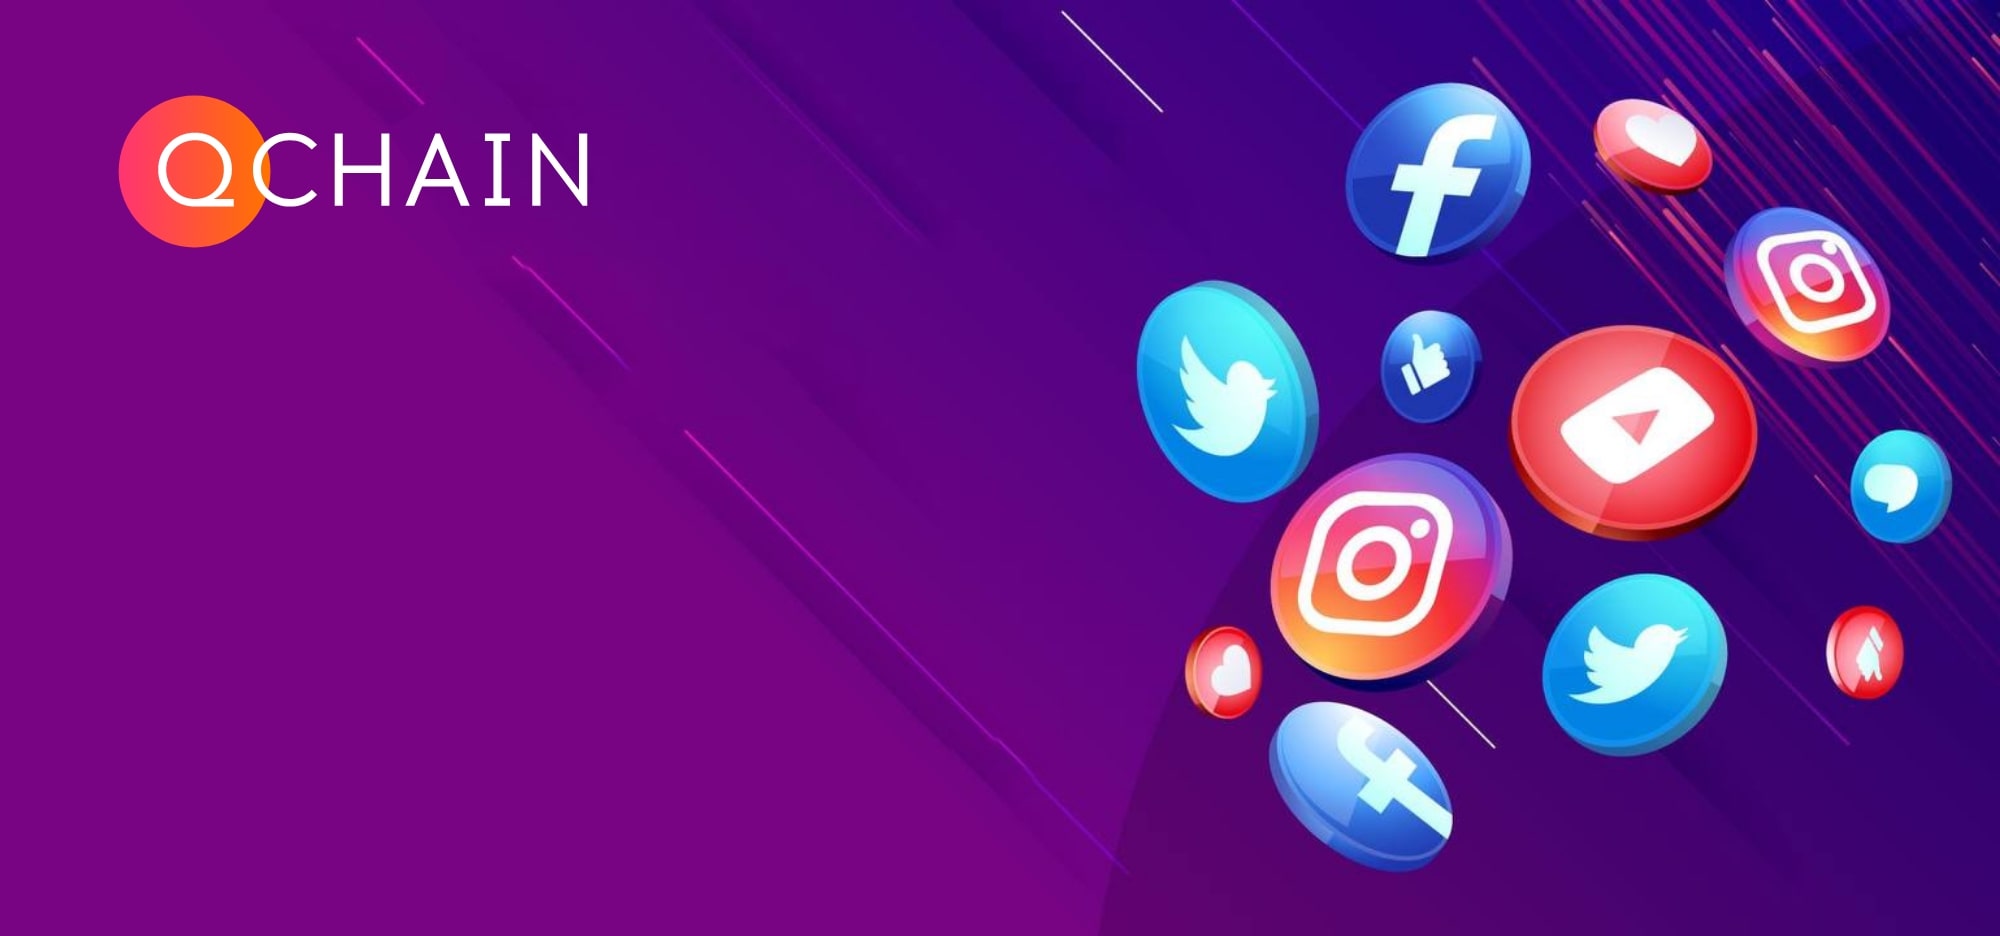 Qchain in social networks